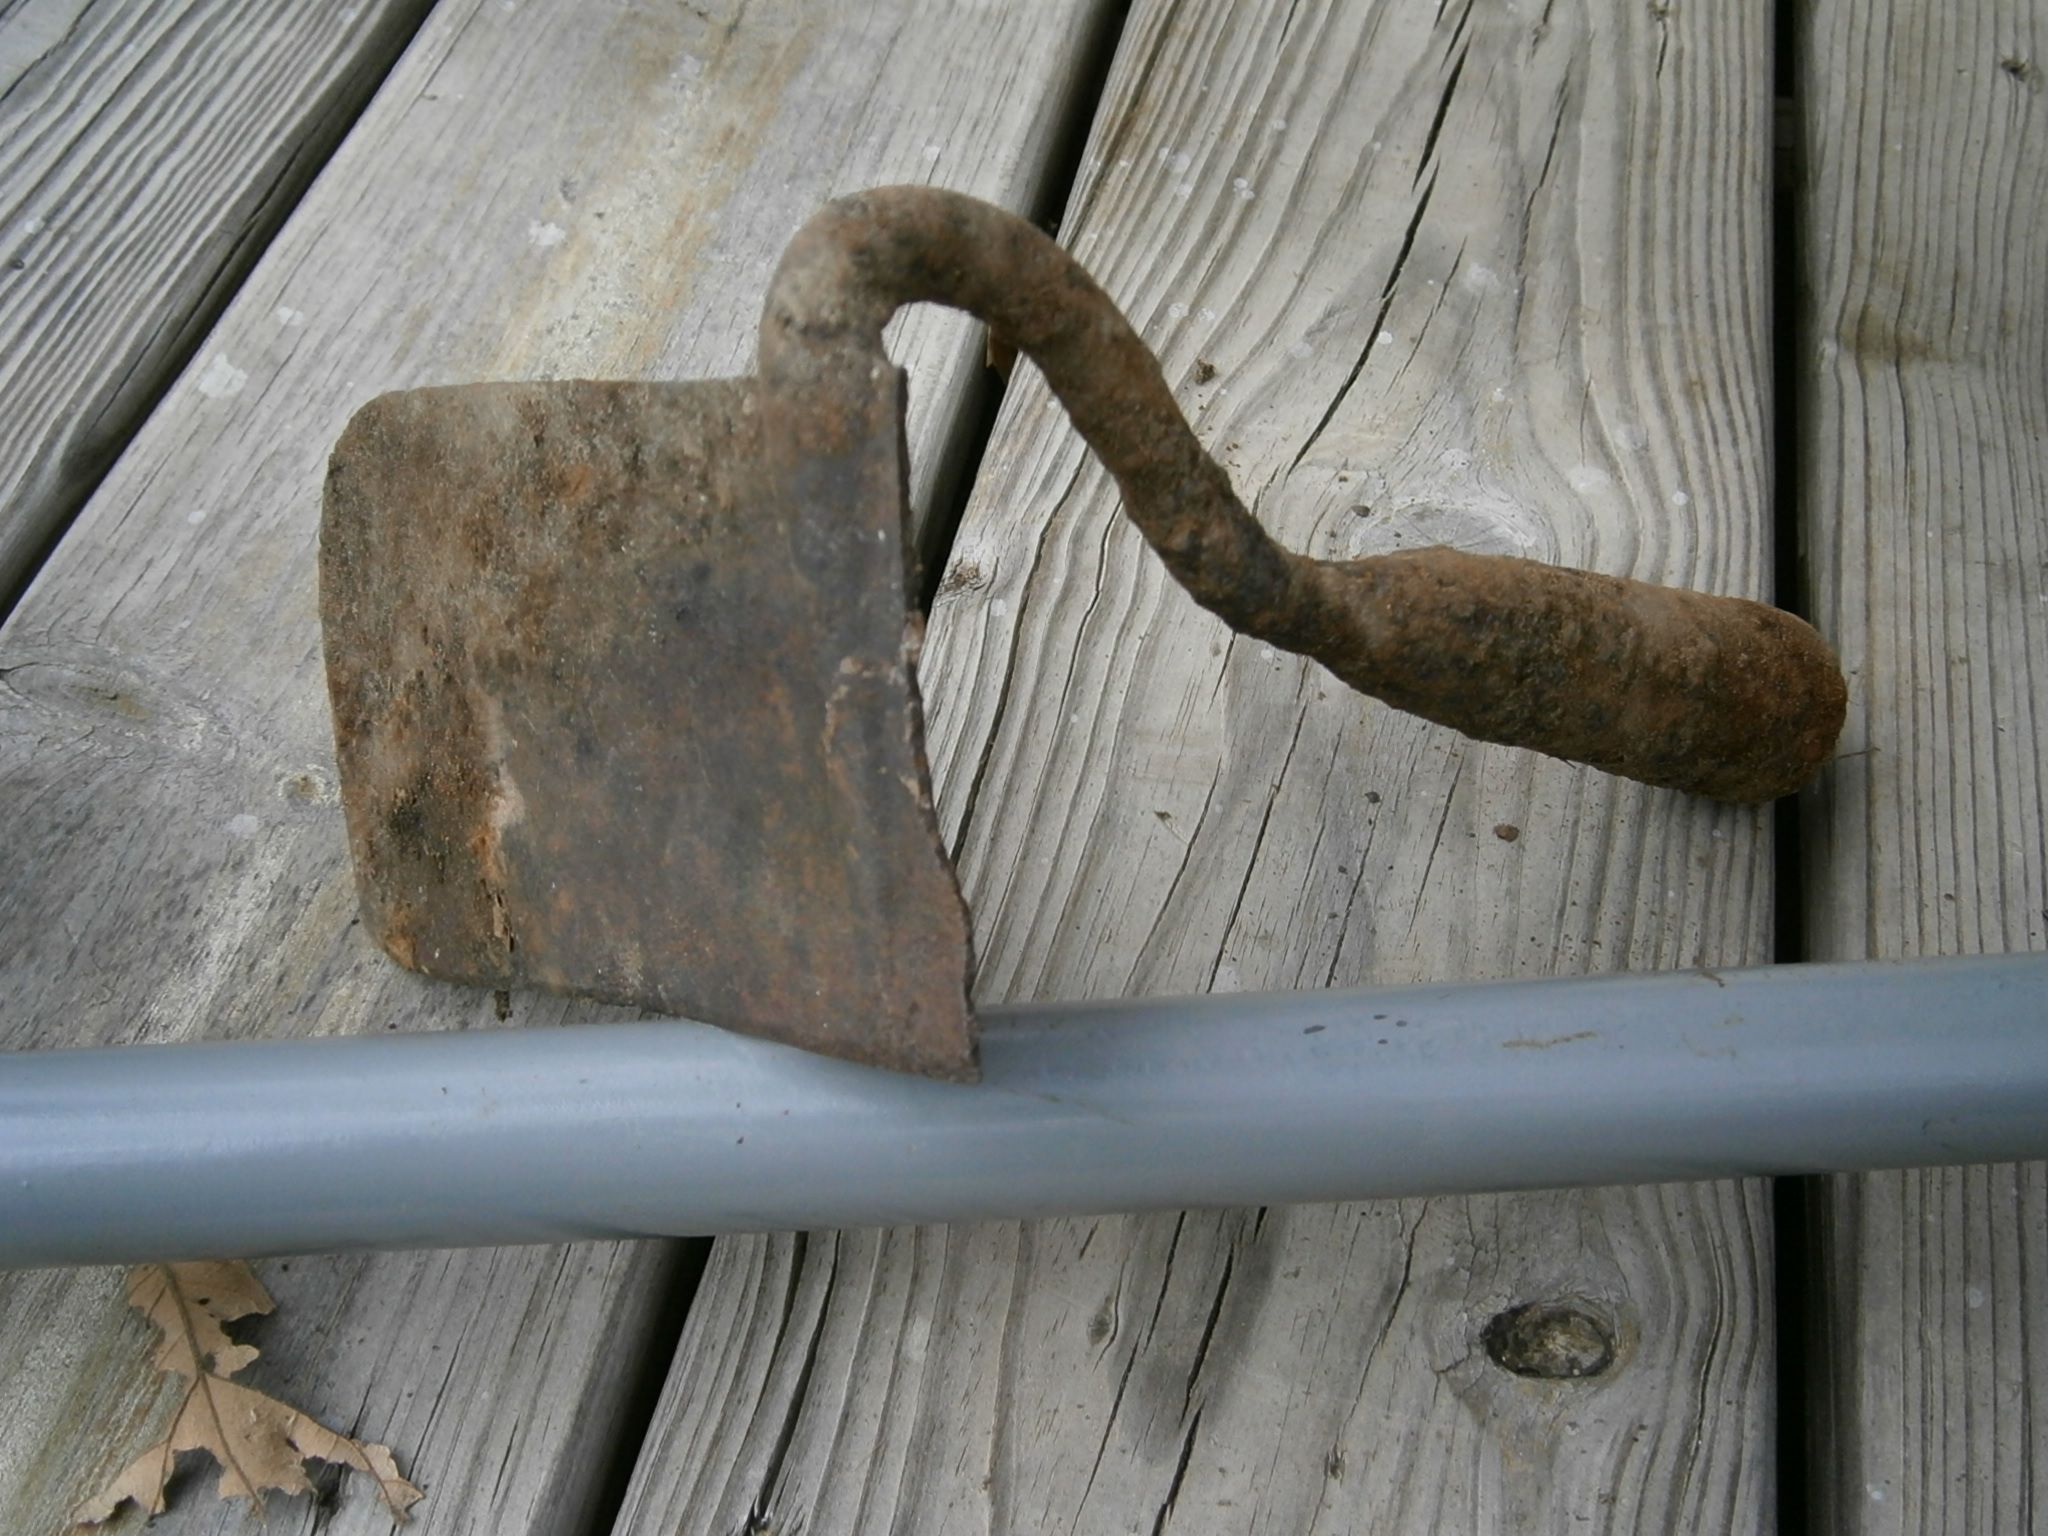 half a garden hoe, well worn and filed blade concave